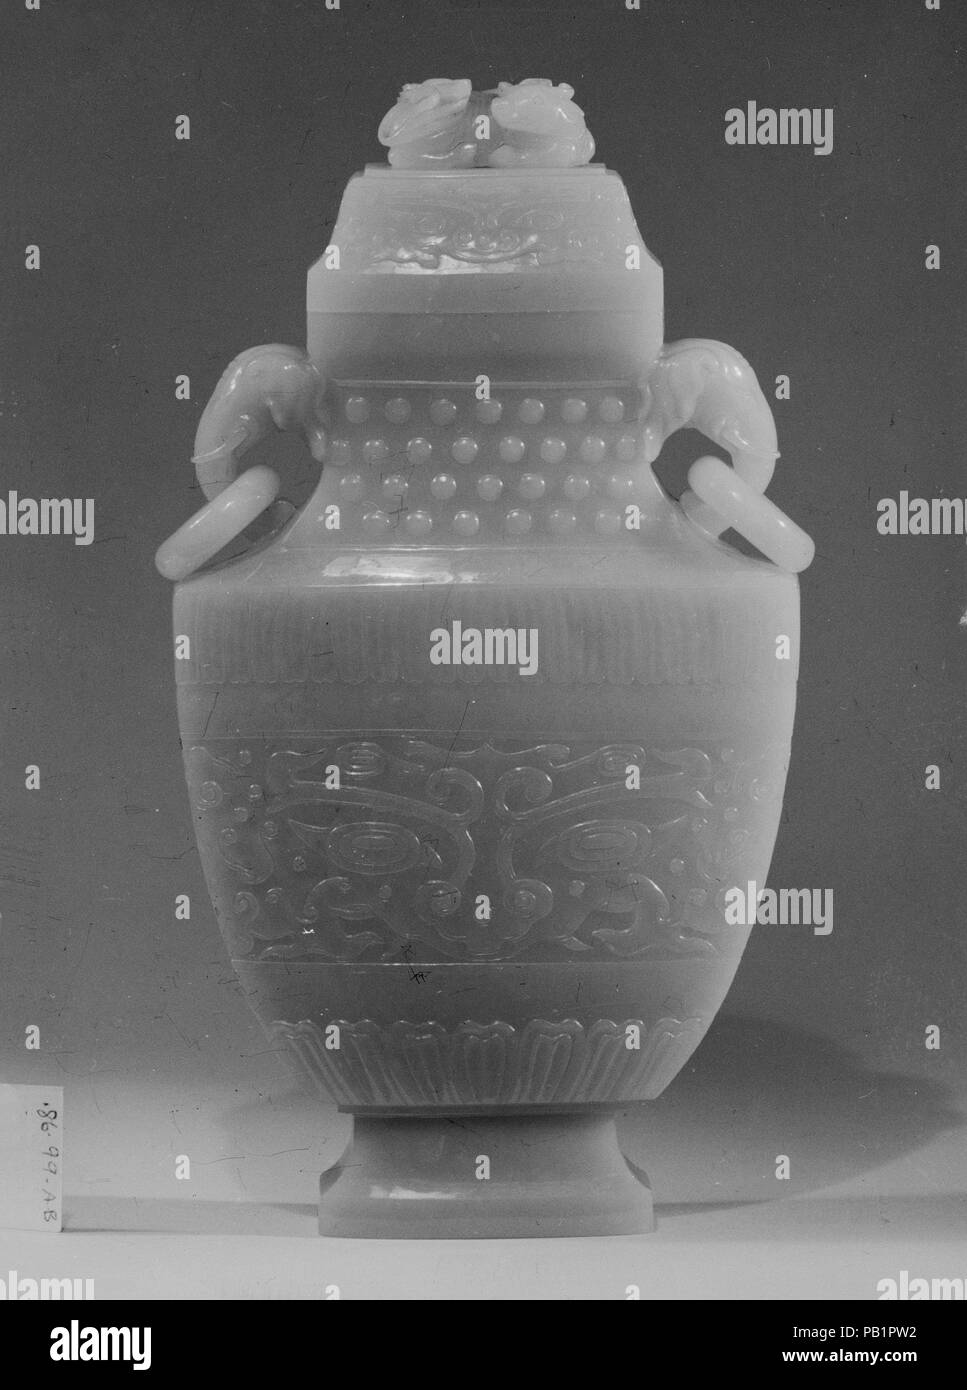 Covered vase. Culture: China. Dimensions: Gr. H. 9 15/16 in. (25.2 cm); W. 5 3/8 in. (13.7 cm). Date: 18th century. Museum: Metropolitan Museum of Art, New York, USA. Stock Photo